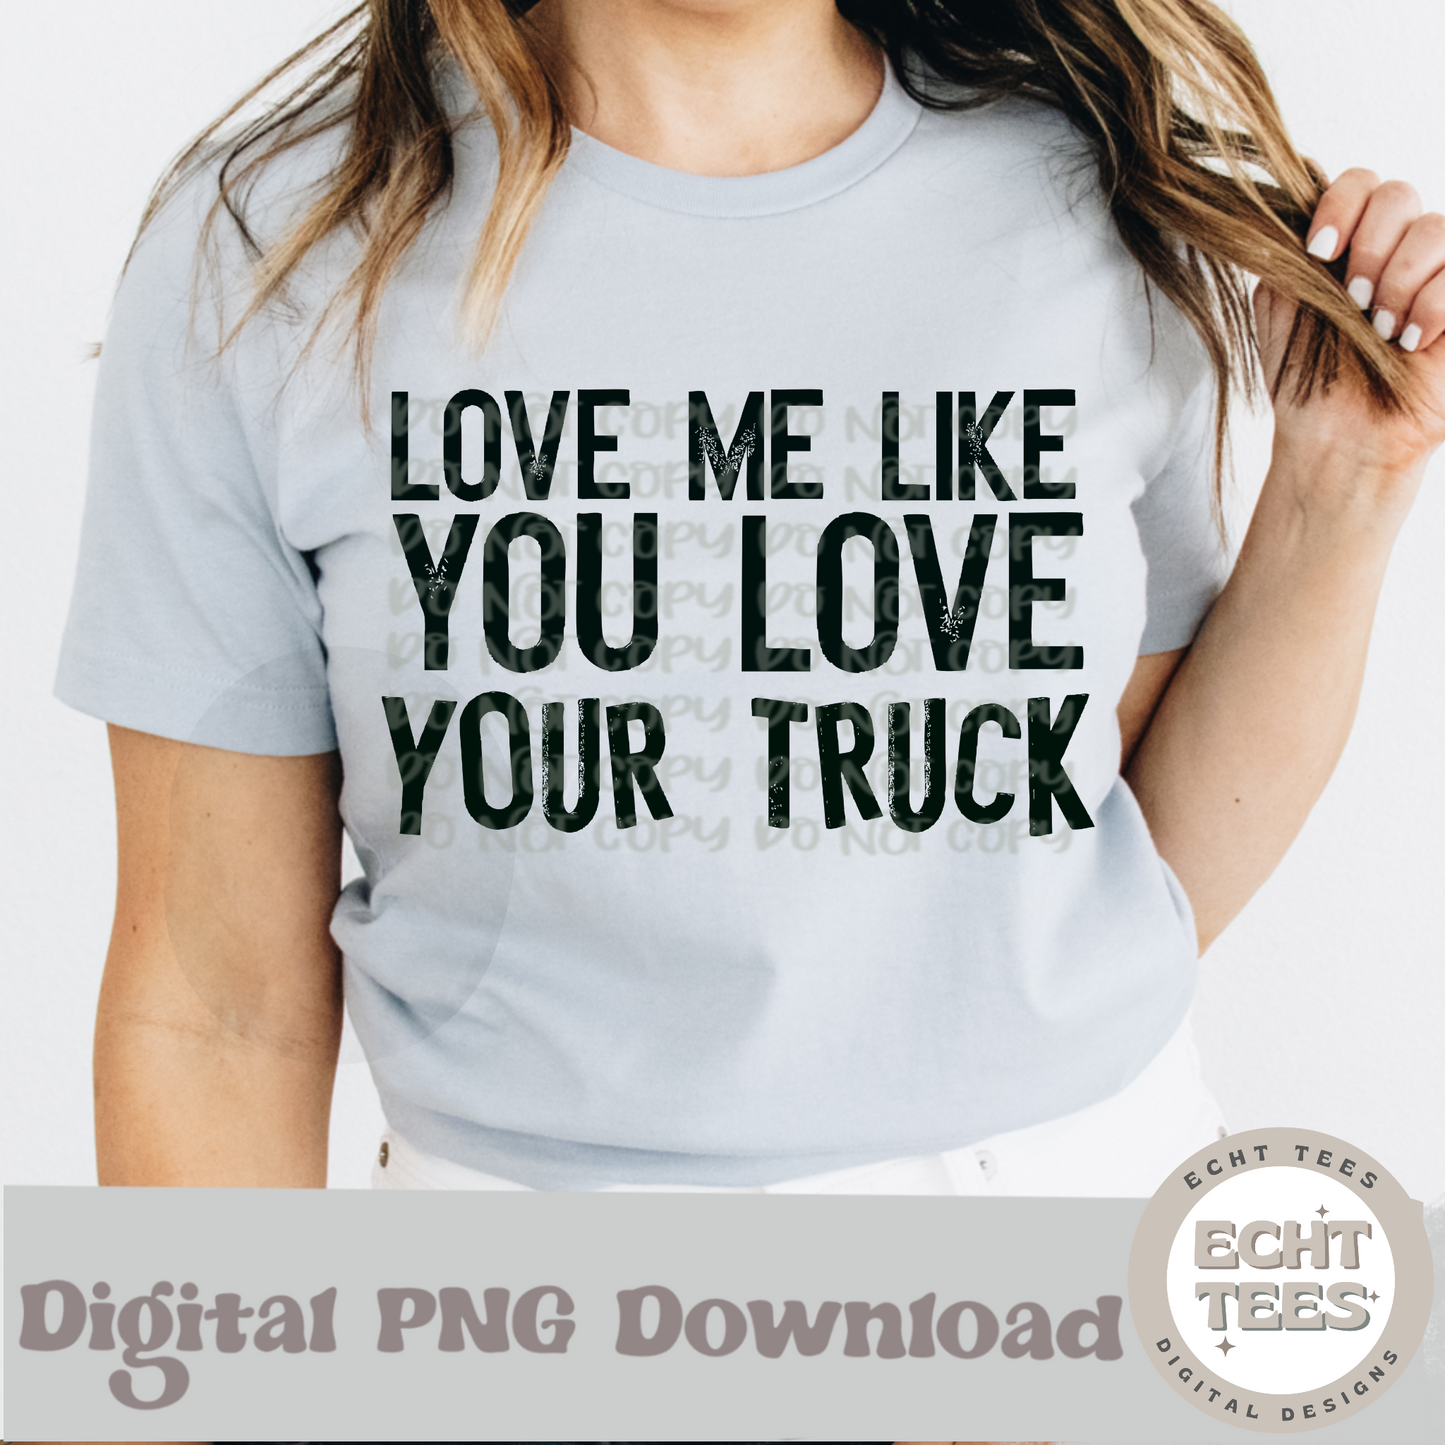 Love me like you love your truck PNG Digital Download